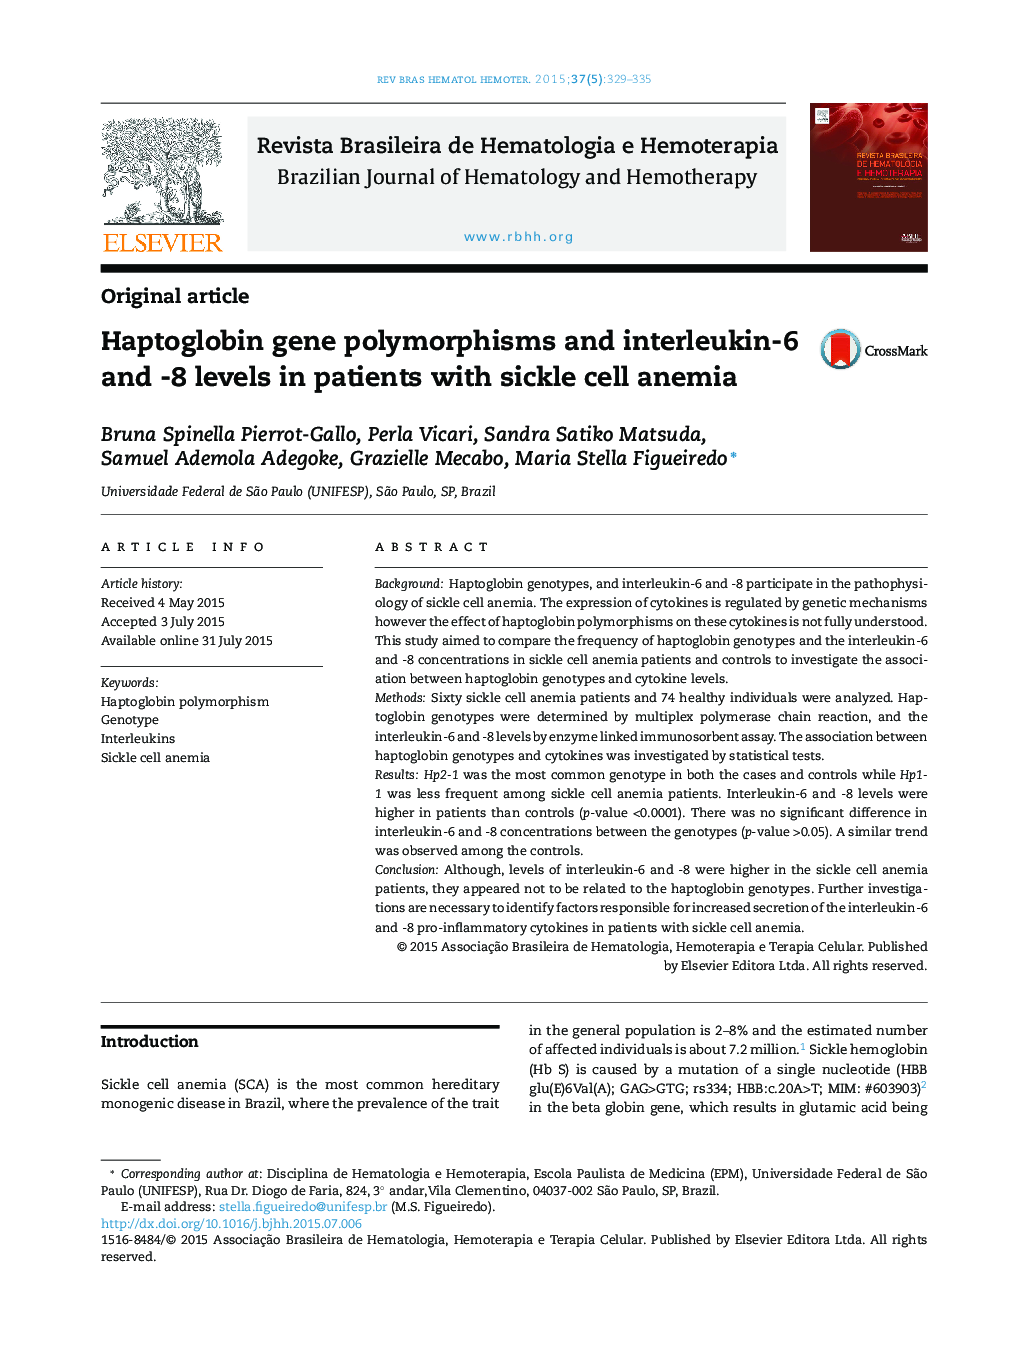 Haptoglobin gene polymorphisms and interleukin-6 and -8 levels in patients with sickle cell anemia